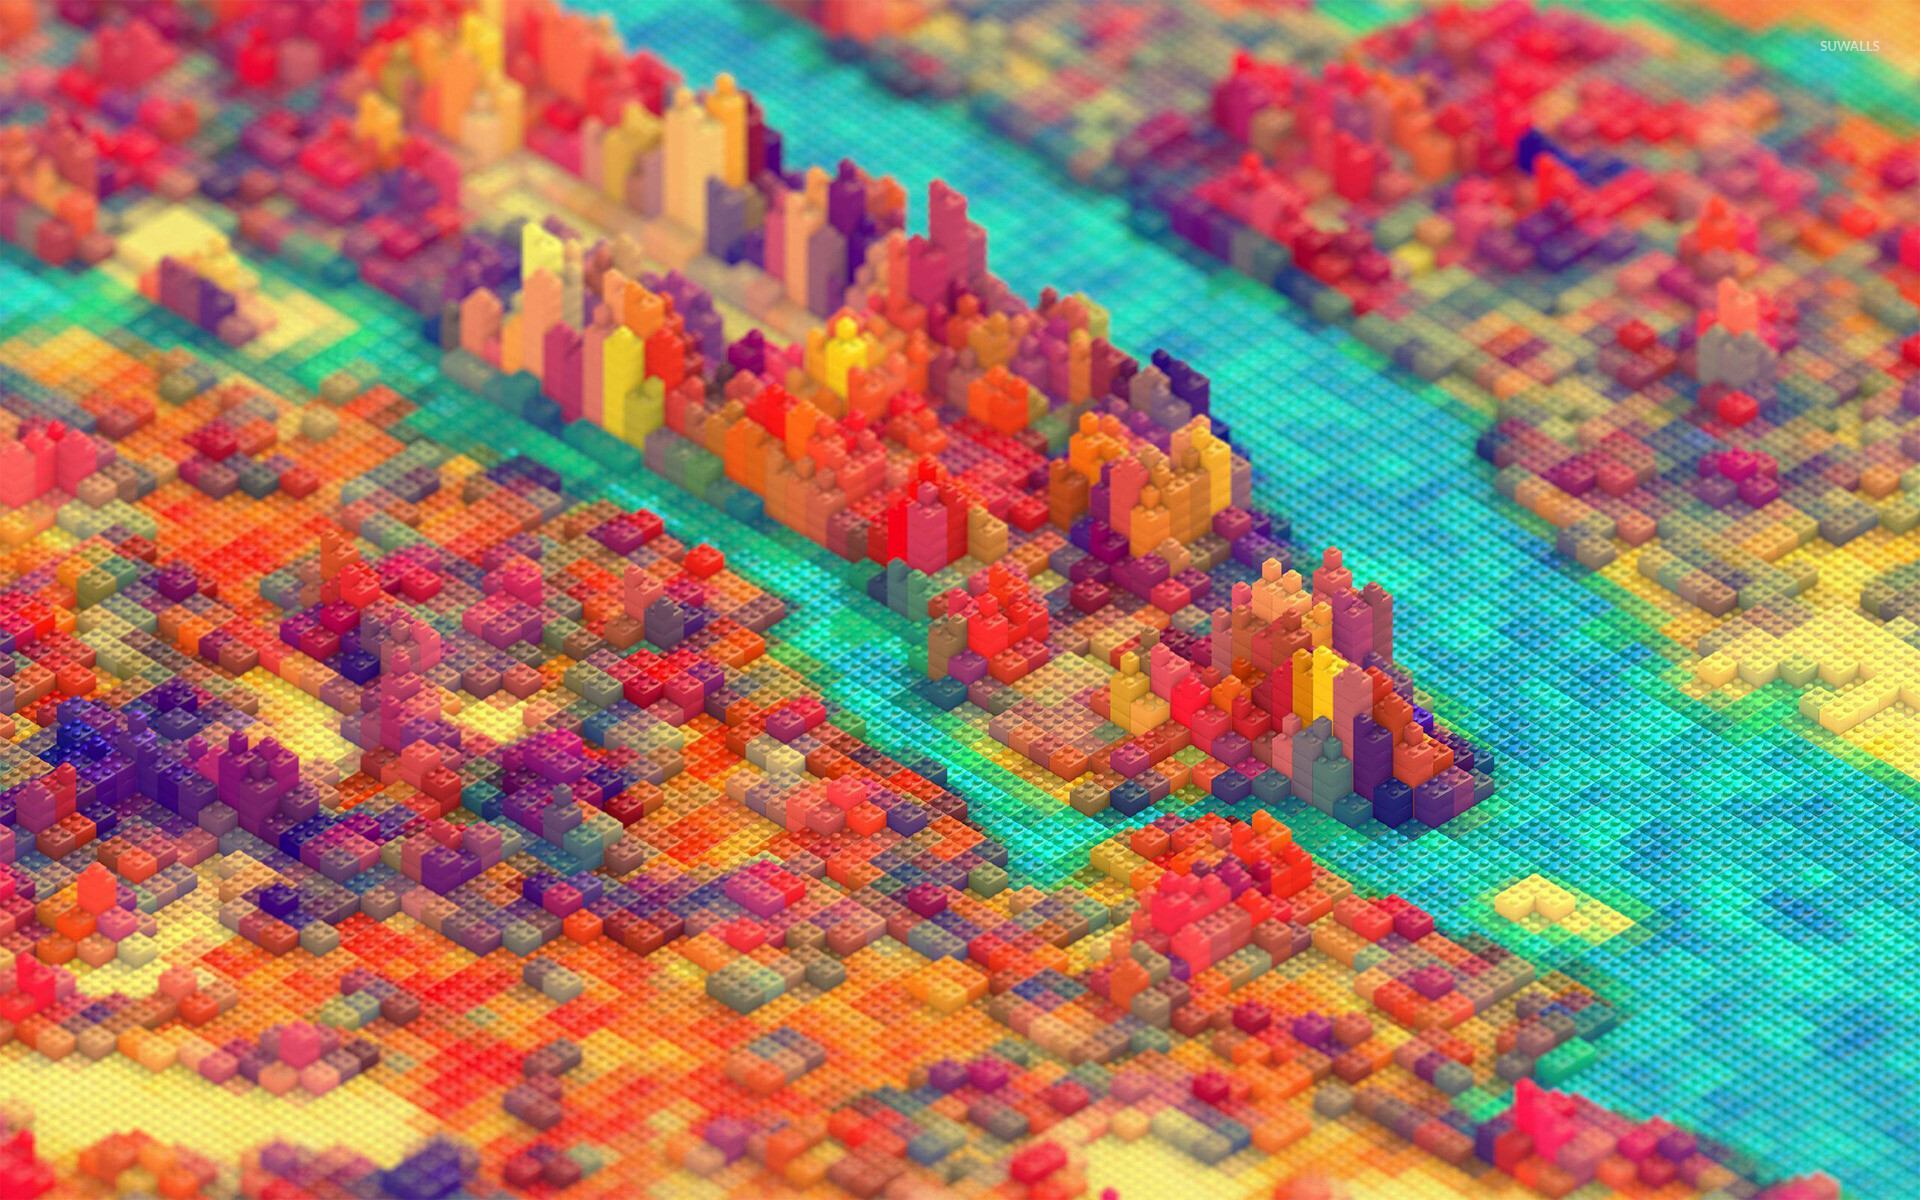 Lego: Small, colorful bricks have multitude of building possibilities. 1920x1200 HD Wallpaper.